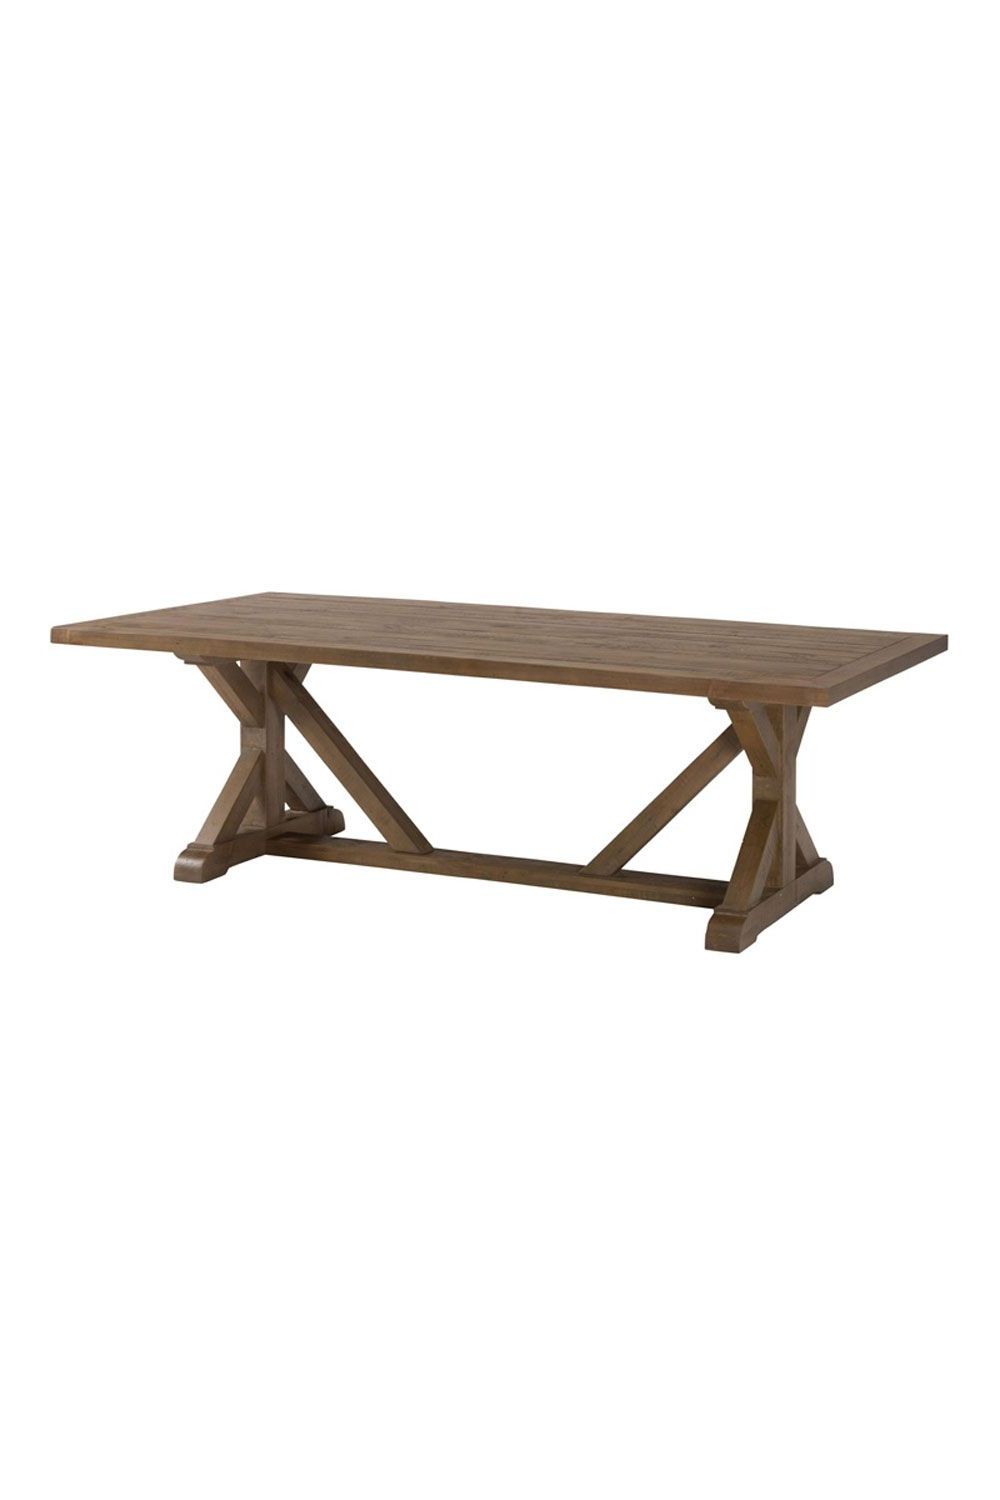 Widely Used Parkmore Reclaimed Wood Extending Dining Tables Intended For Best Farm Tables – Country Farmhouse Kitchen Tables (View 25 of 25)